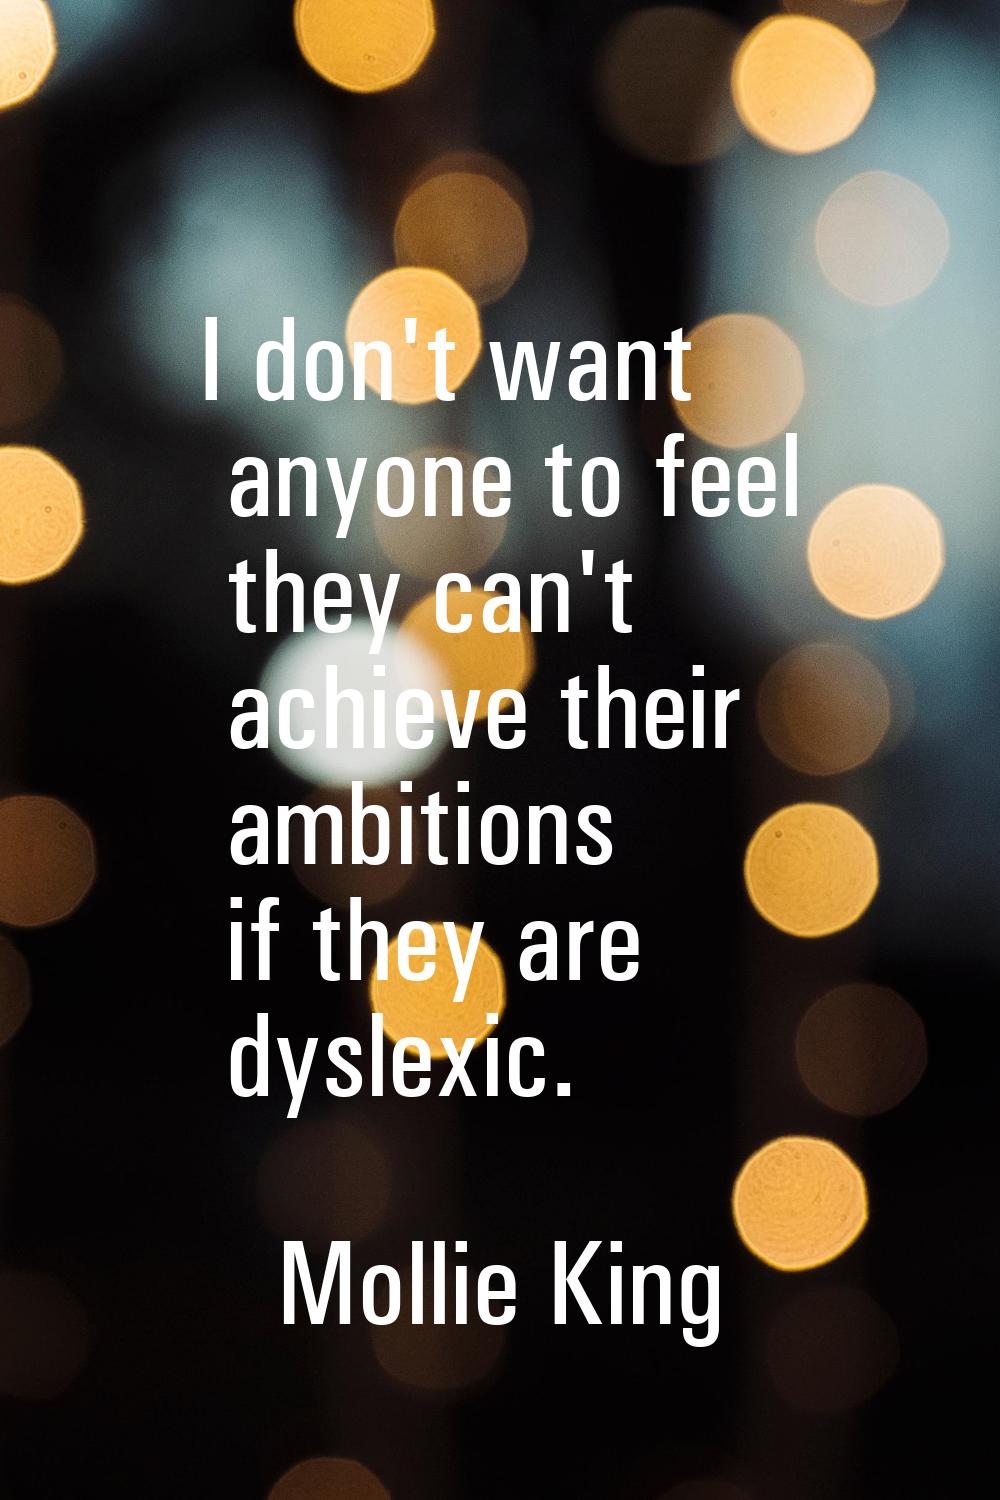 I don't want anyone to feel they can't achieve their ambitions if they are dyslexic.